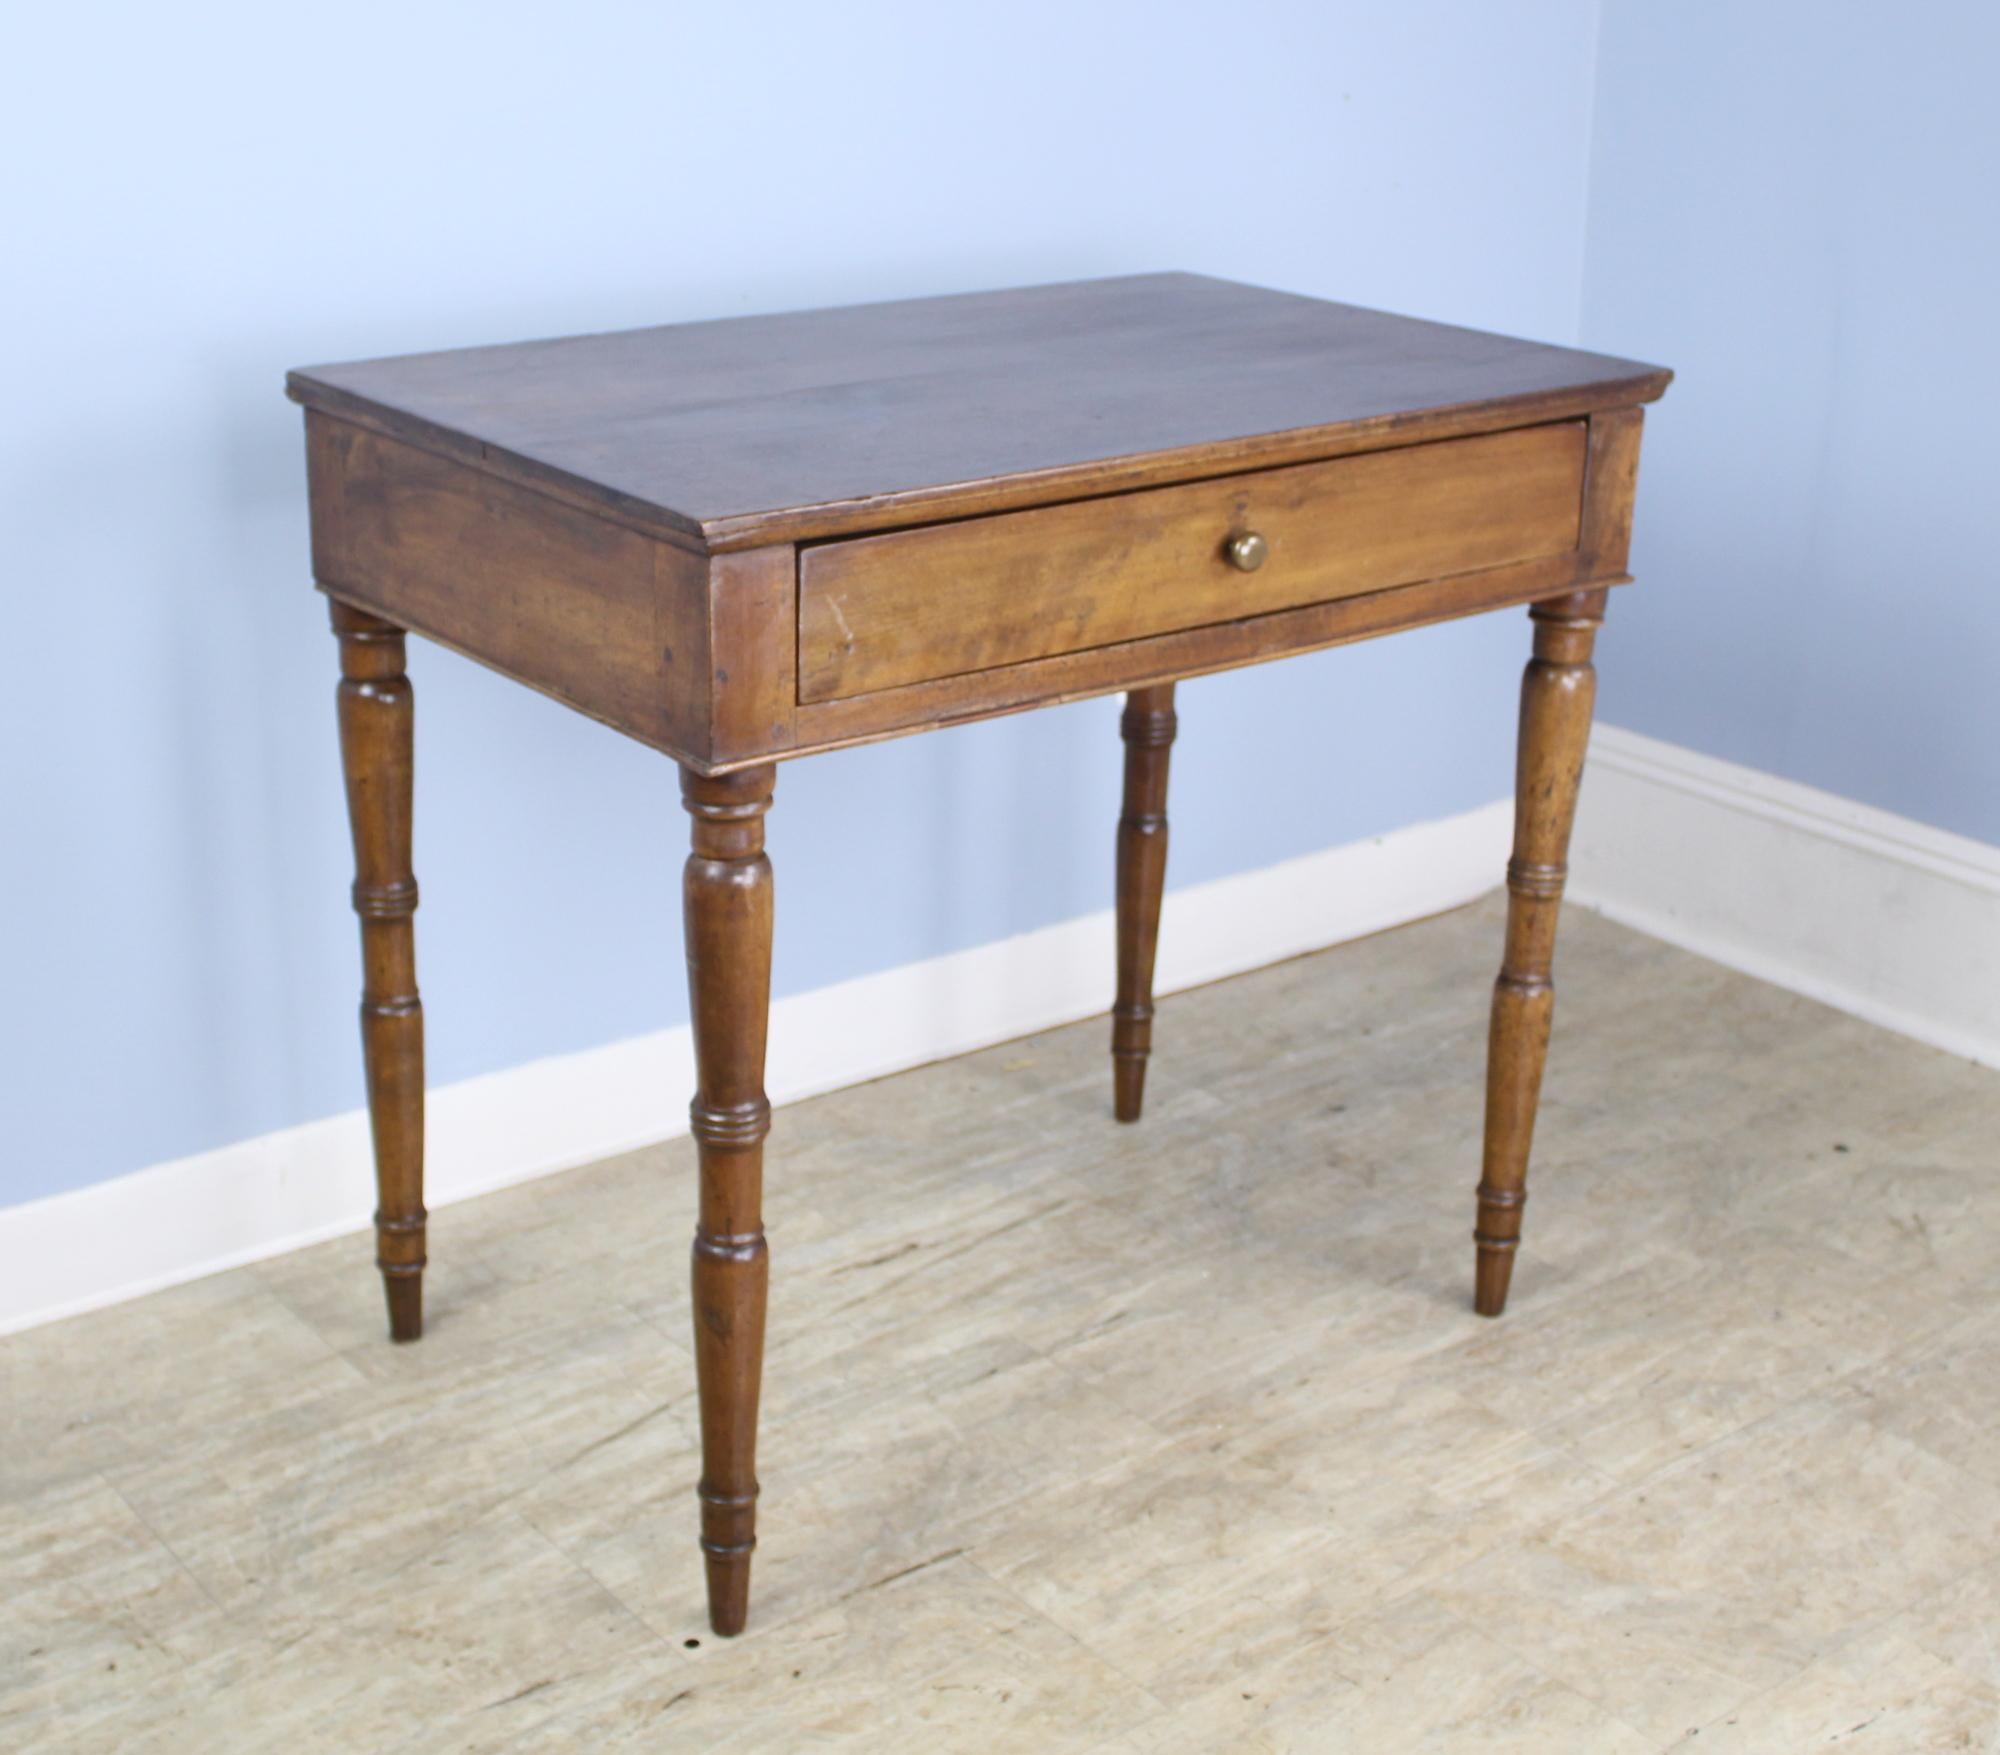 A small writing table in beautifully grained walnut with a book match top. The turned legs add an exciting design element and are glossy and well-shaped. The single roomy drawer is deep and closes snugly. 25 inch apron is good for knees. Small